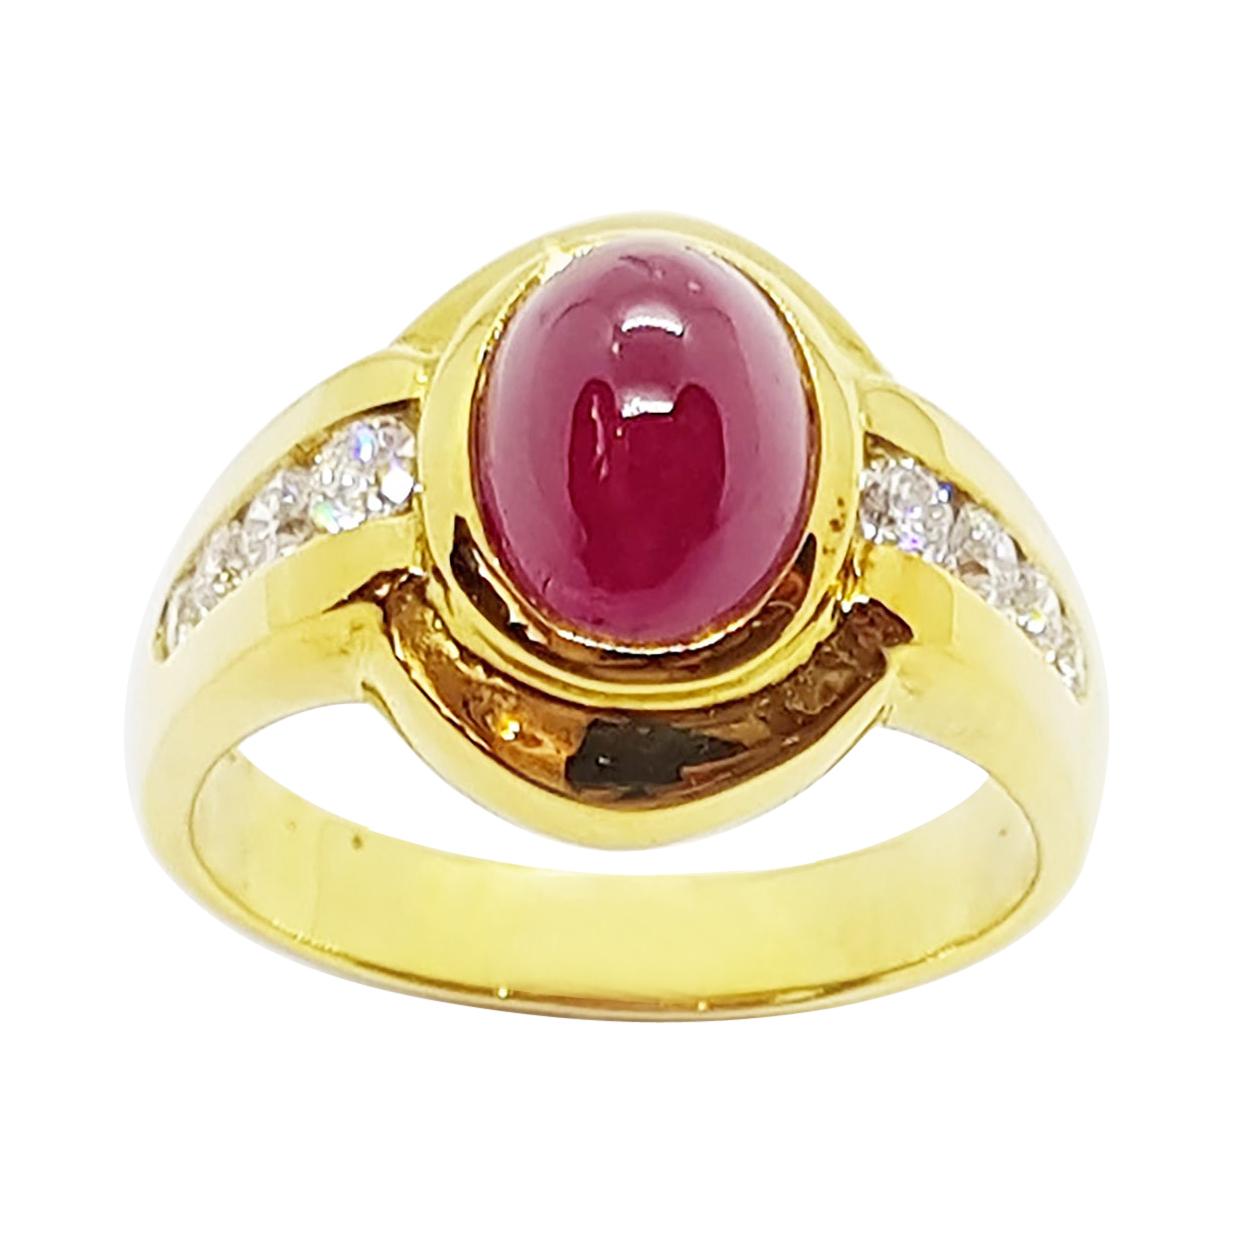 Cabochon Ruby with Diamond Ring Set in 18 Karat Gold Settings